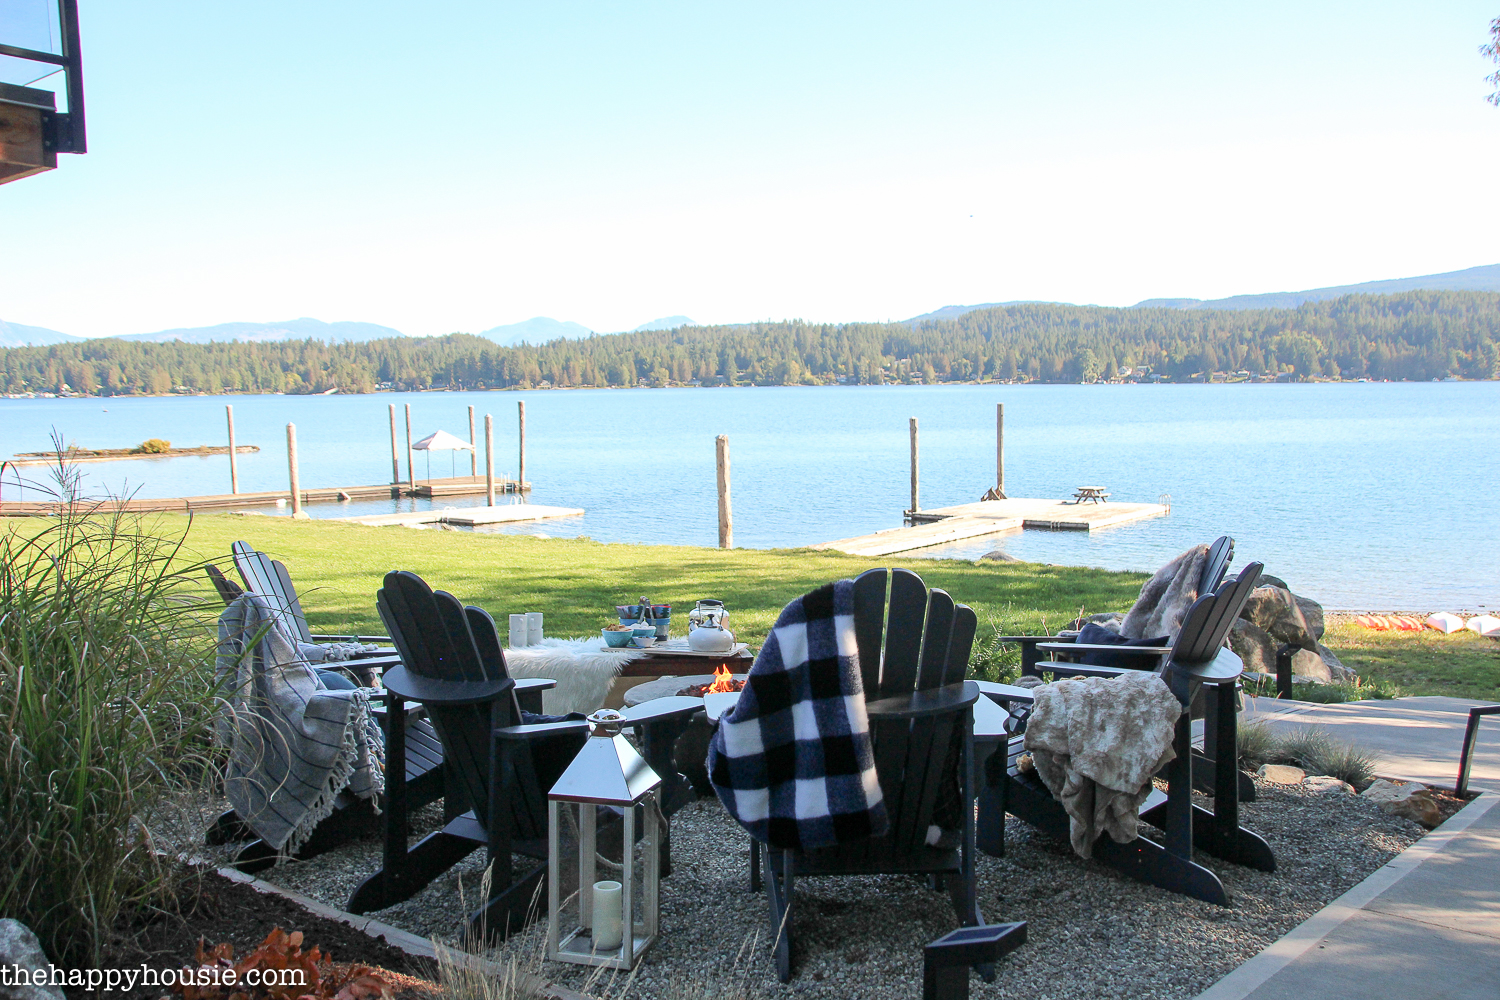 Adirondack chairs on a pea gravel patio with a lake view